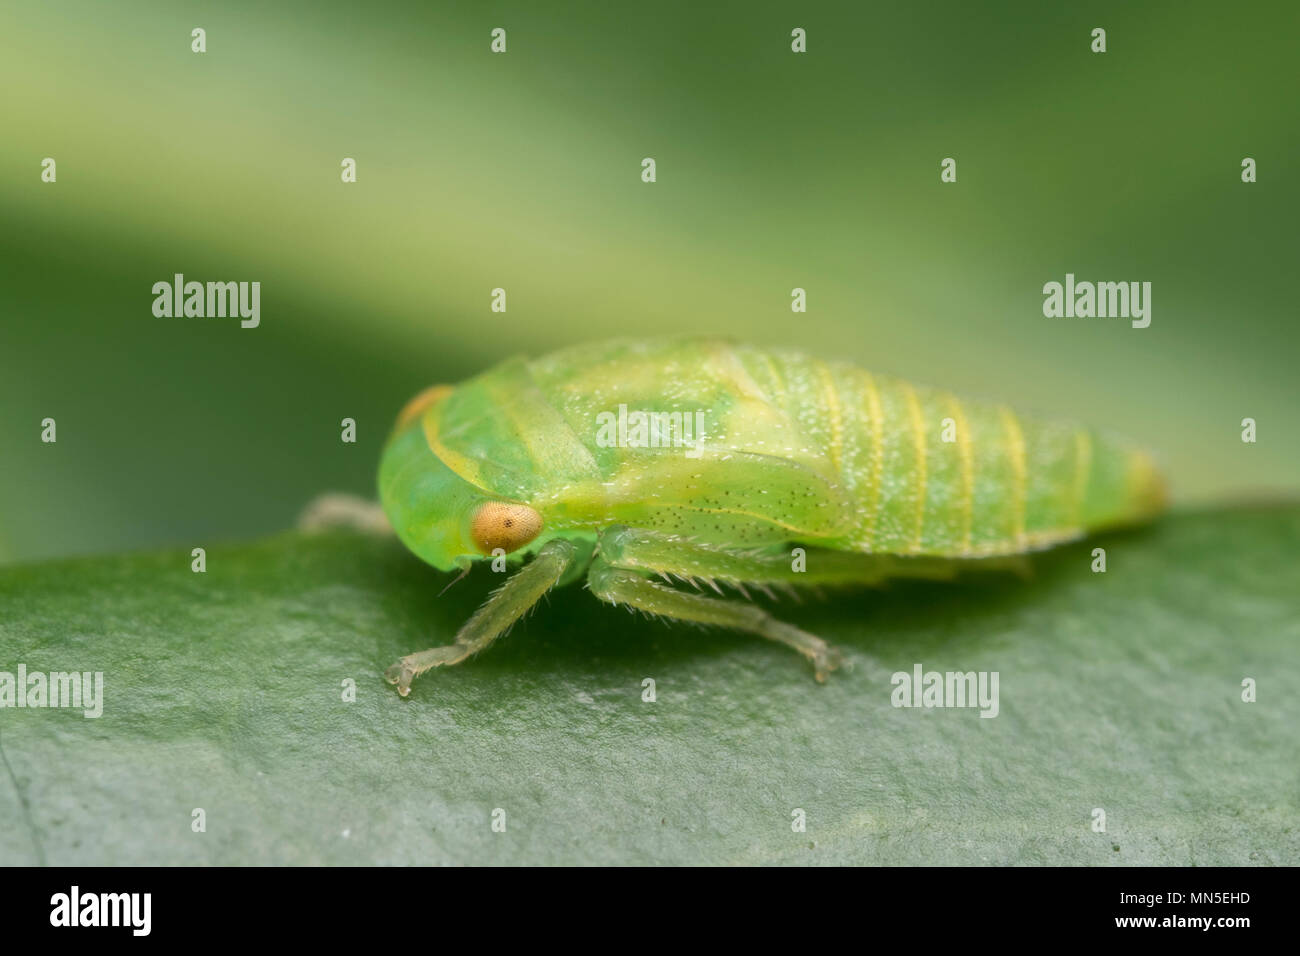 Leafhopper nymph in the family Cicadellidae resting on leaf. Tipperary, Ireland Stock Photo